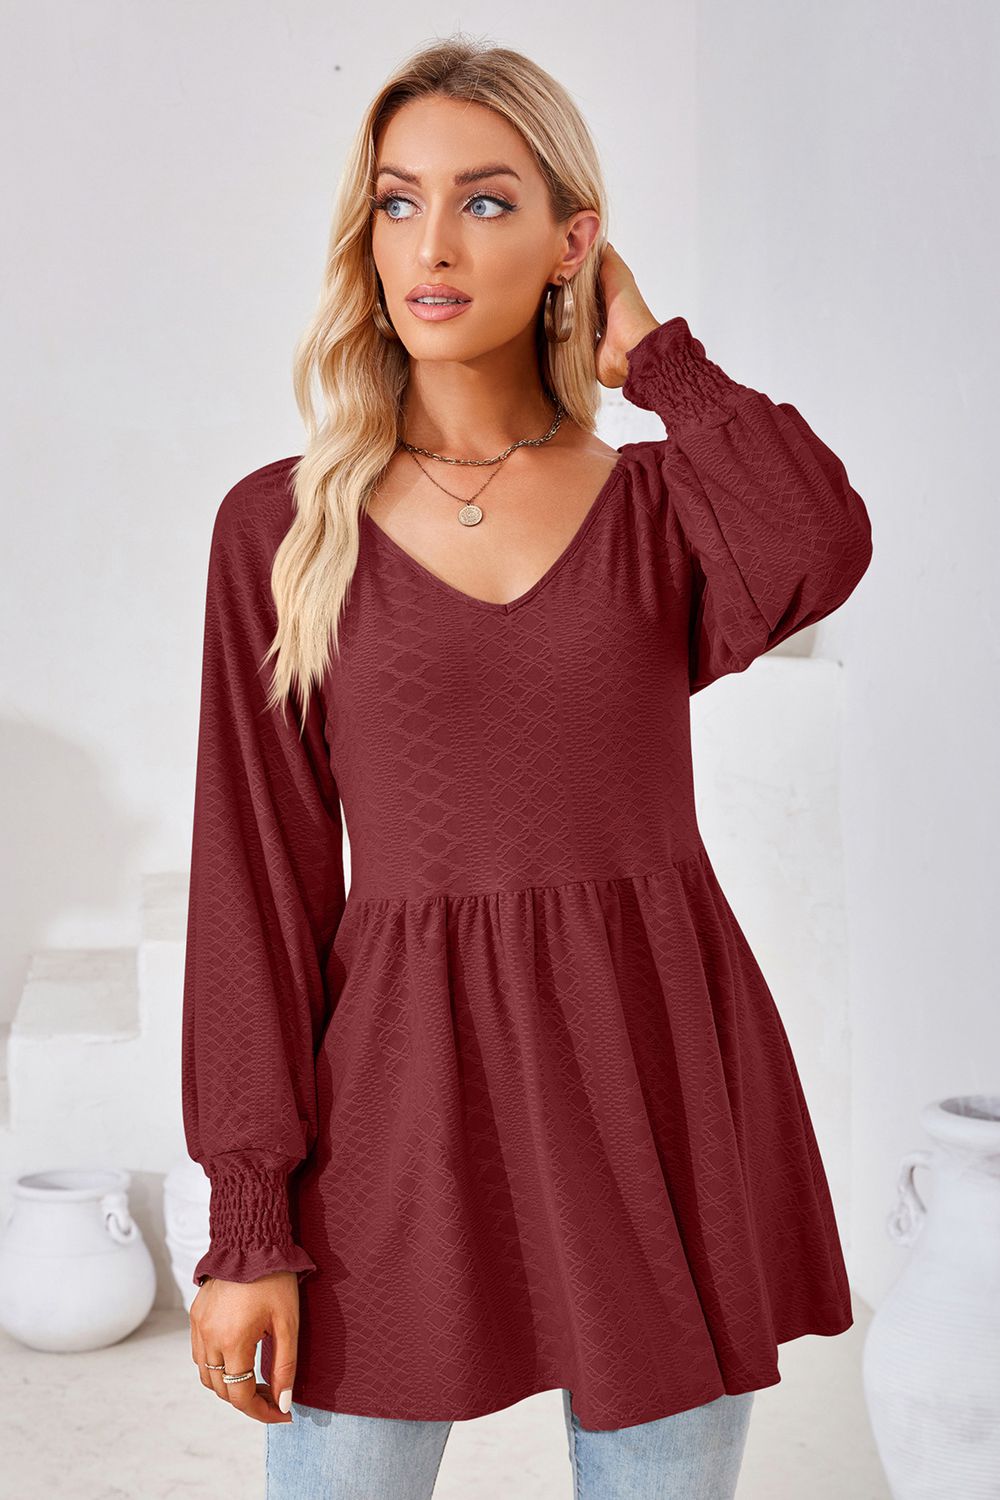 V-Neck Lantern Sleeve Blouse - Women’s Clothing & Accessories - Shirts & Tops - 17 - 2024